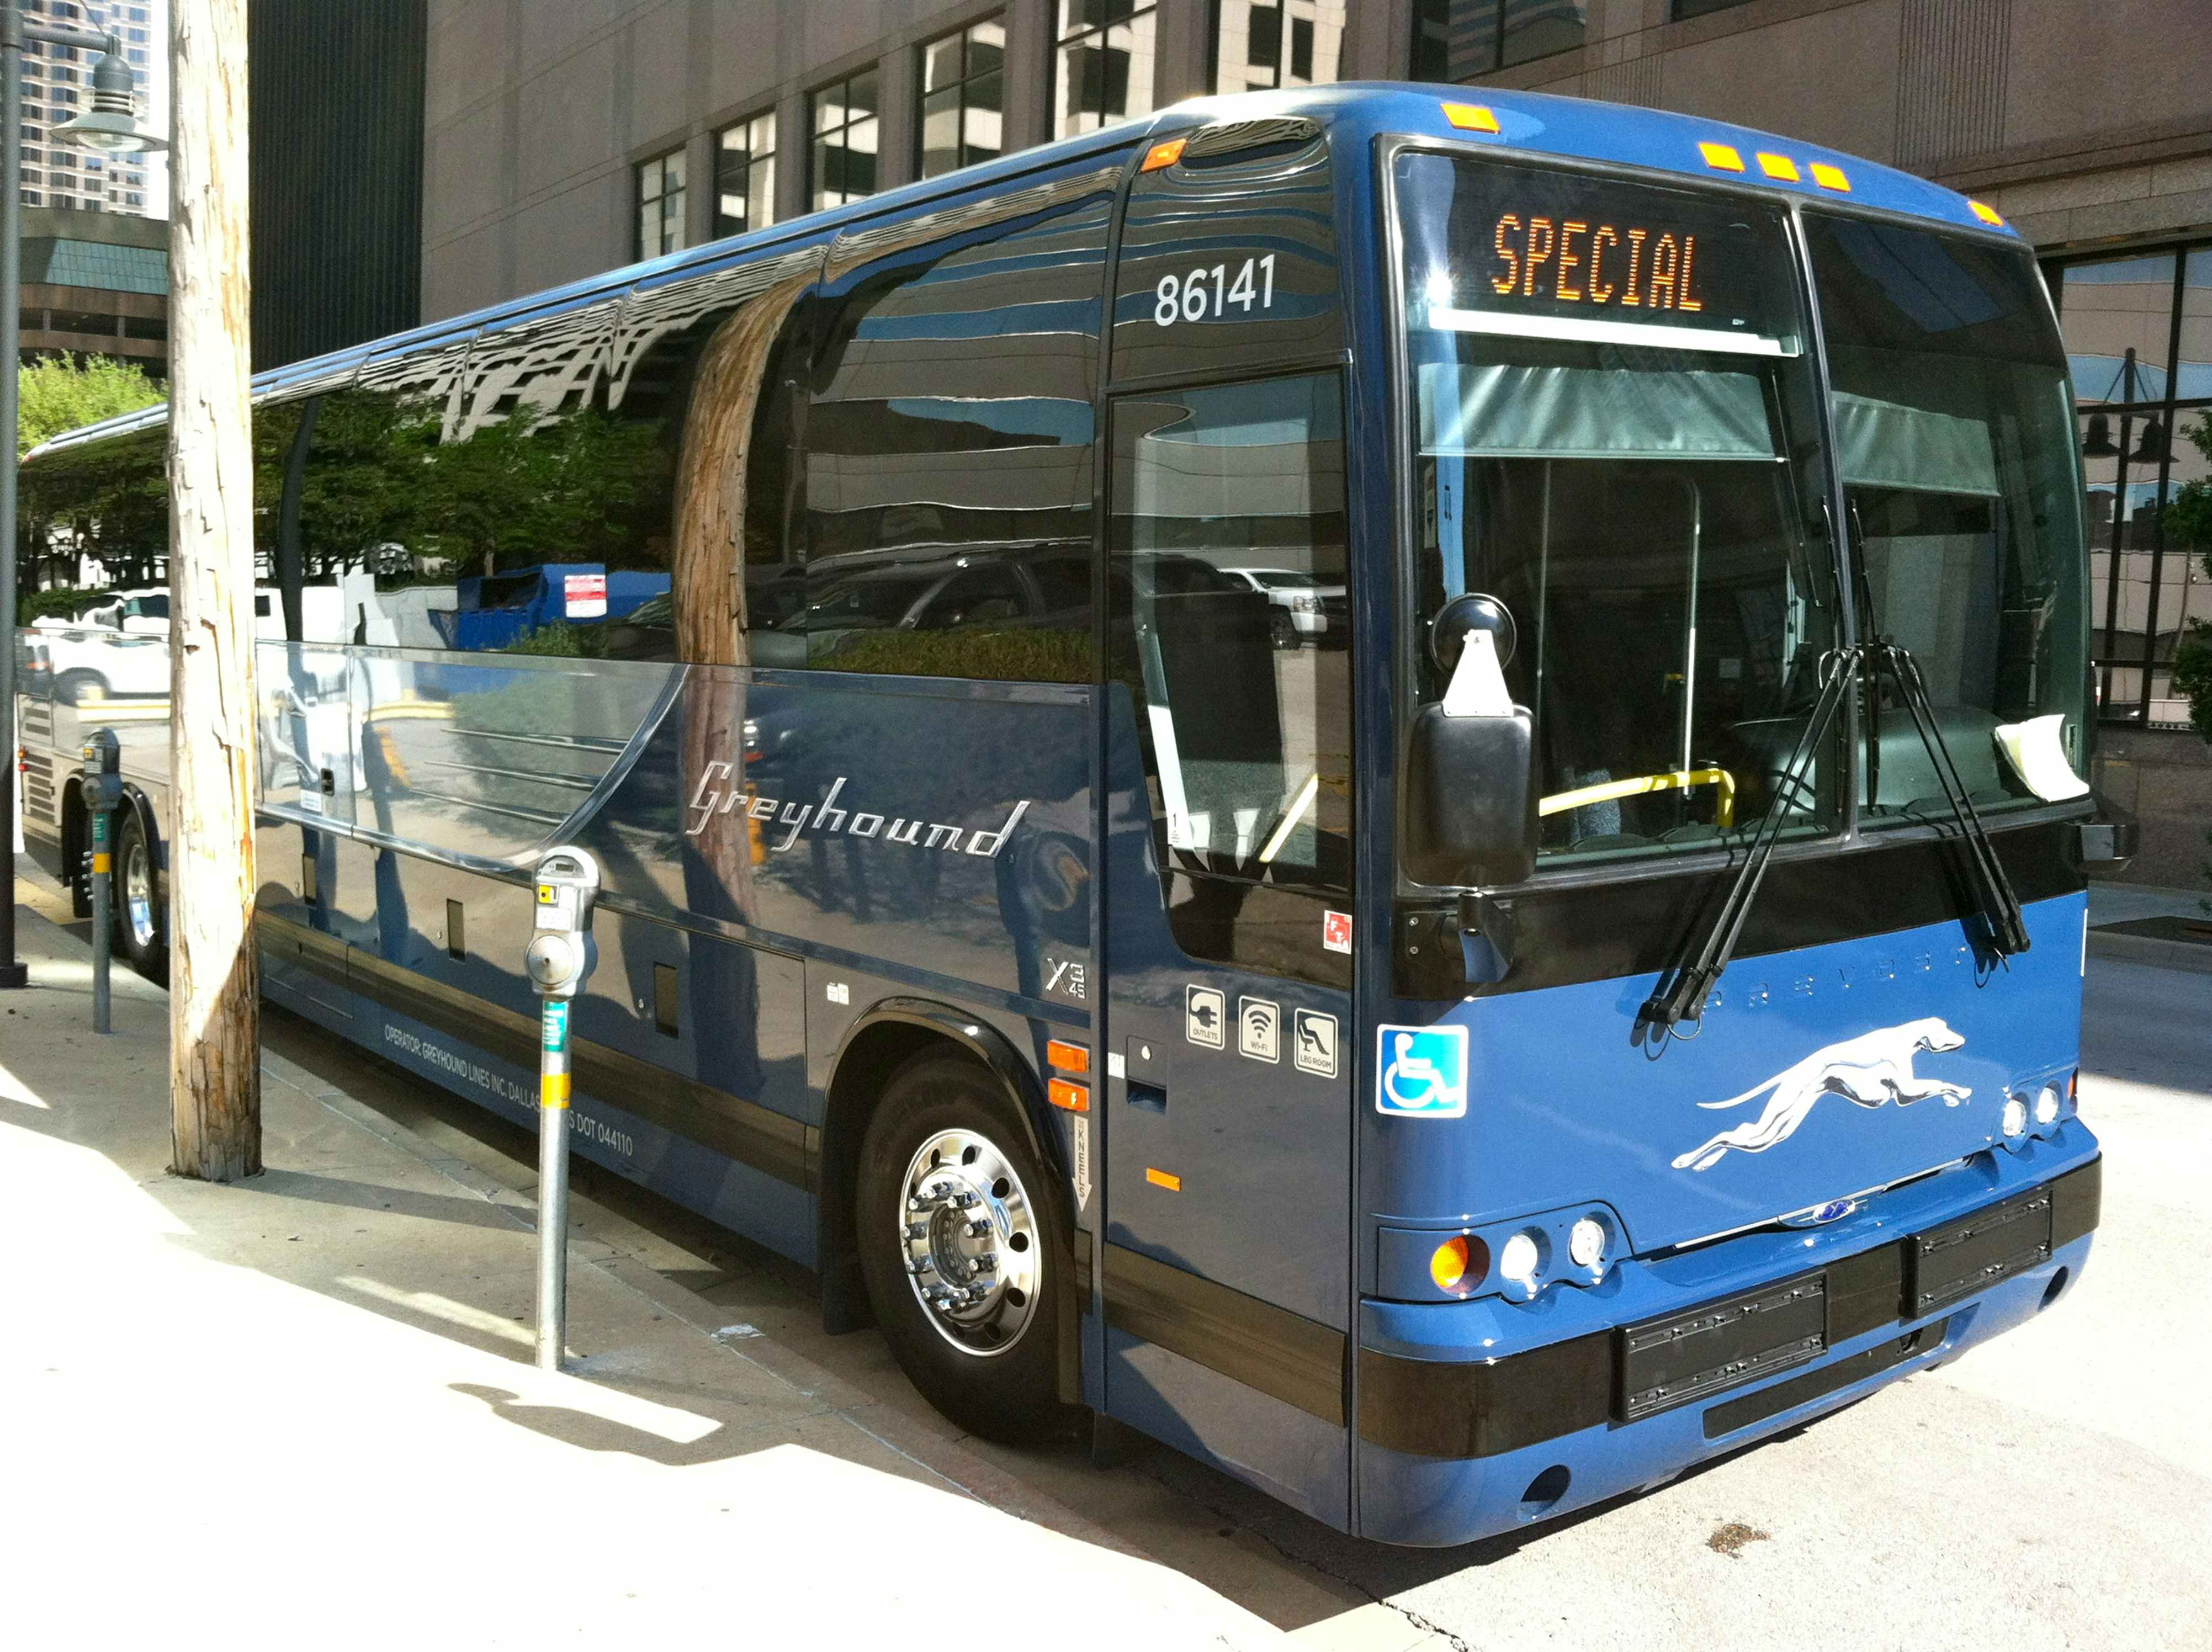 A greyhound bus parked curbside in a city or metropolitan area